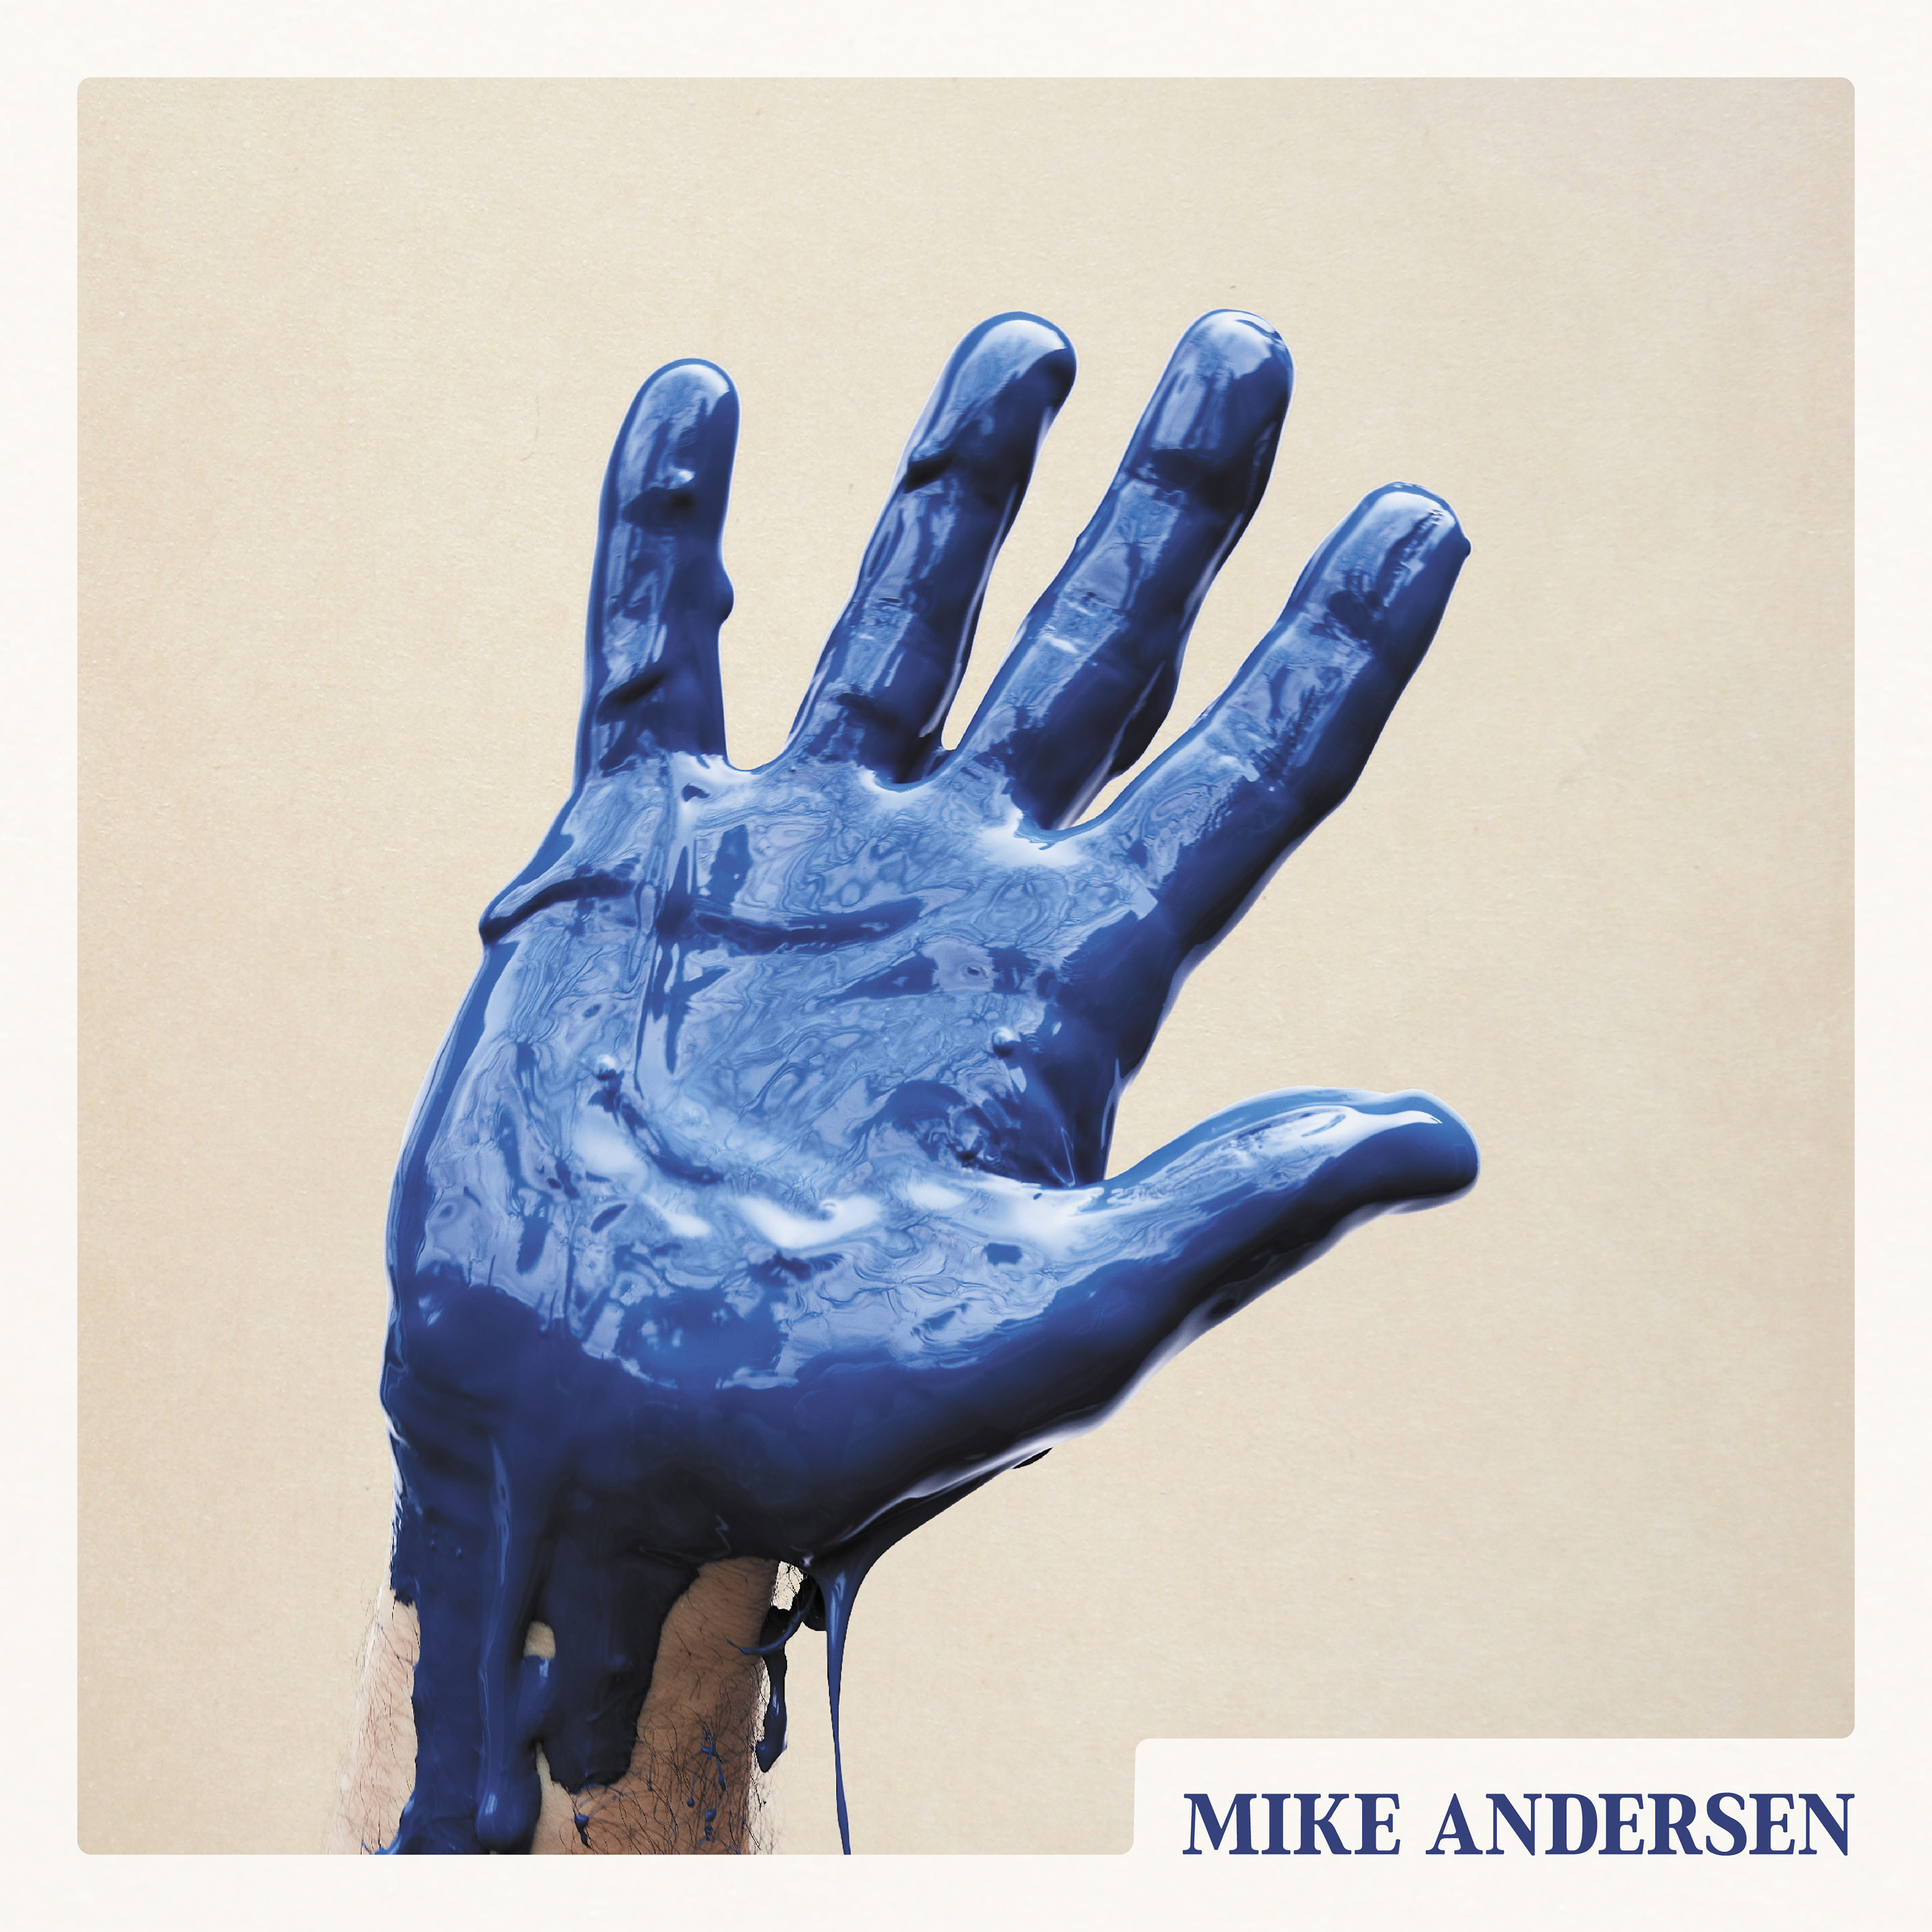 MIKE ANDERSEN - Raise Your Hand